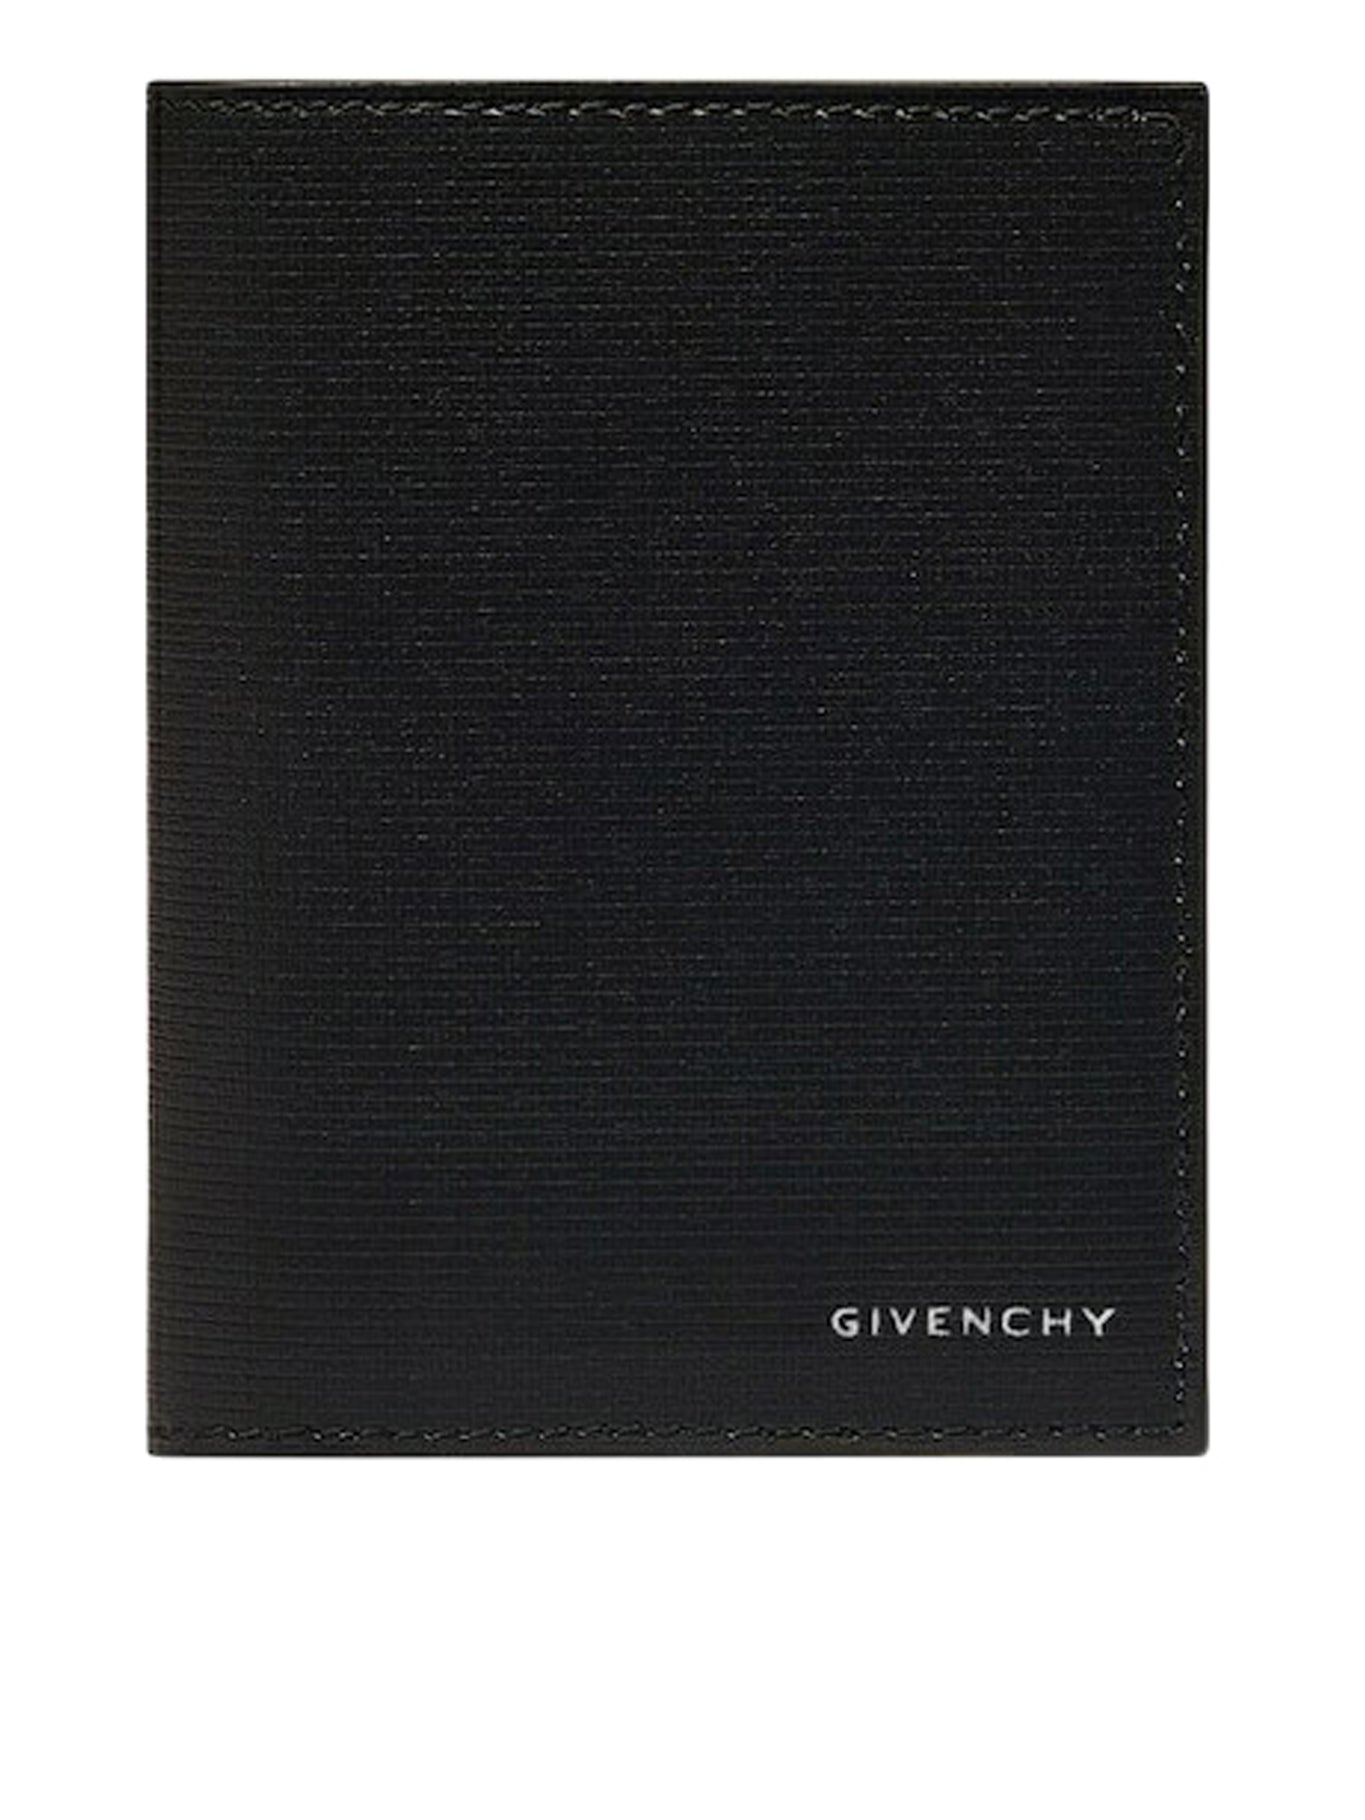 GIVENCHY card holder in 4G Classic leather